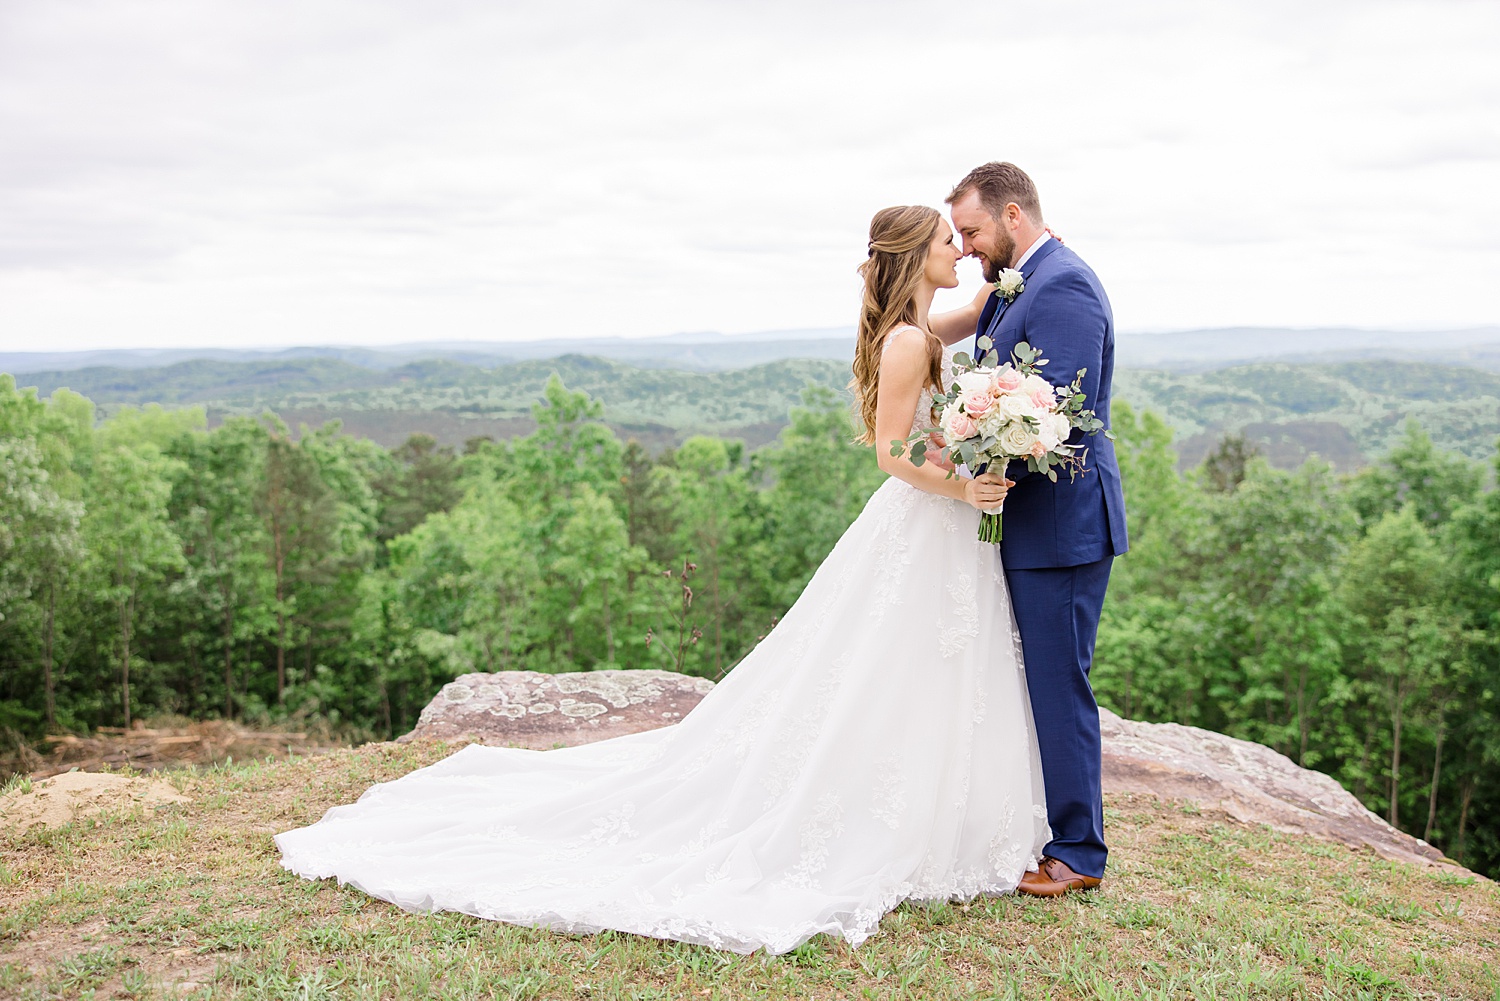 stunning wedding portraits with a beautiful natural landscape in the background